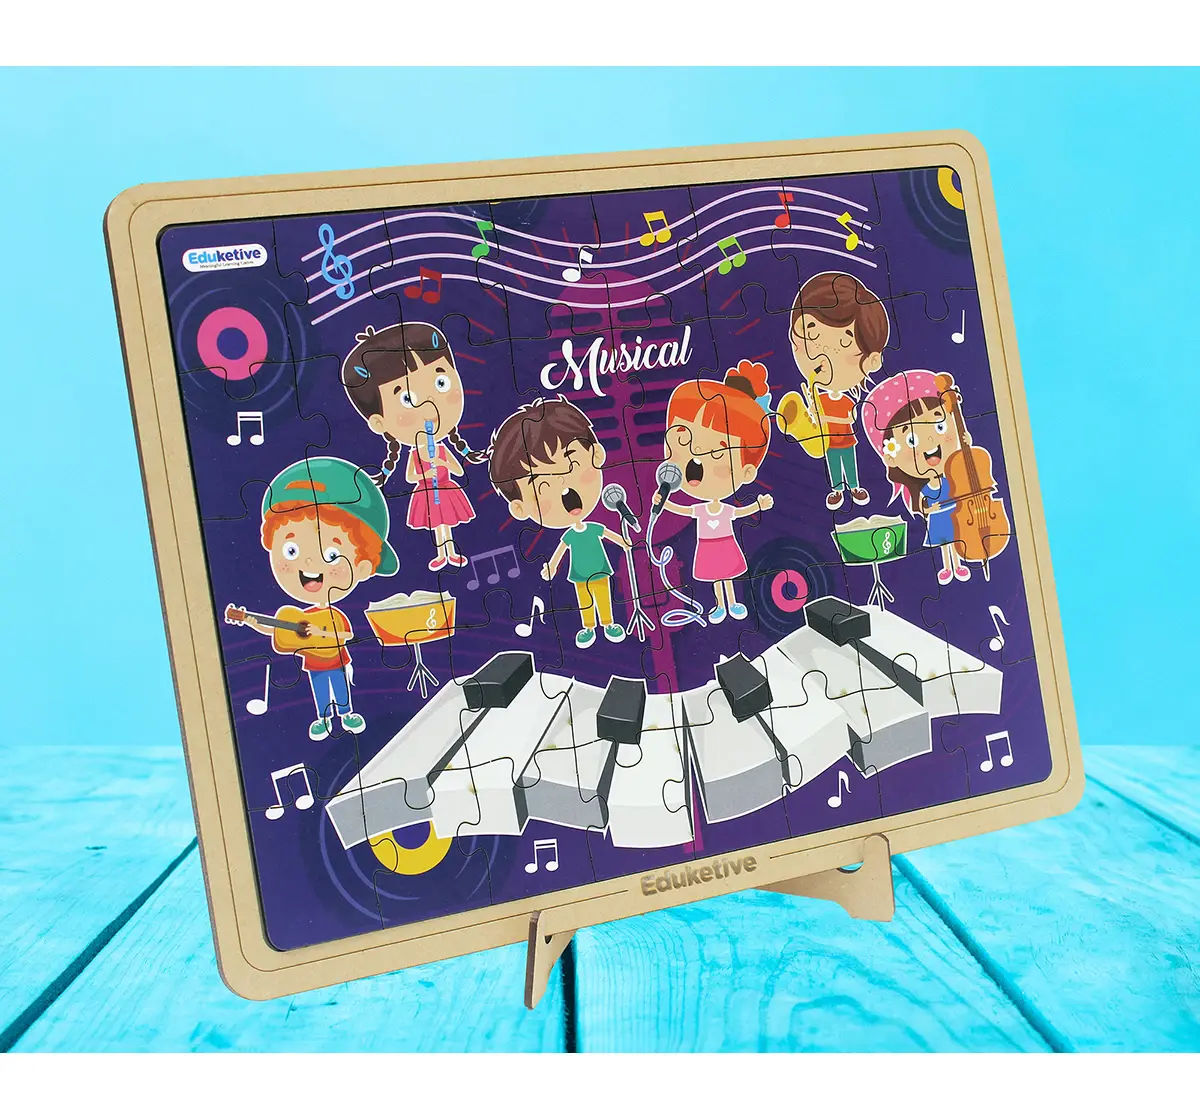 Eduketive PuzzleDecor The Musical Decorative 40 Pieces Jigsaw Puzzle with Stand Kids Age 3-9 Years Preschool